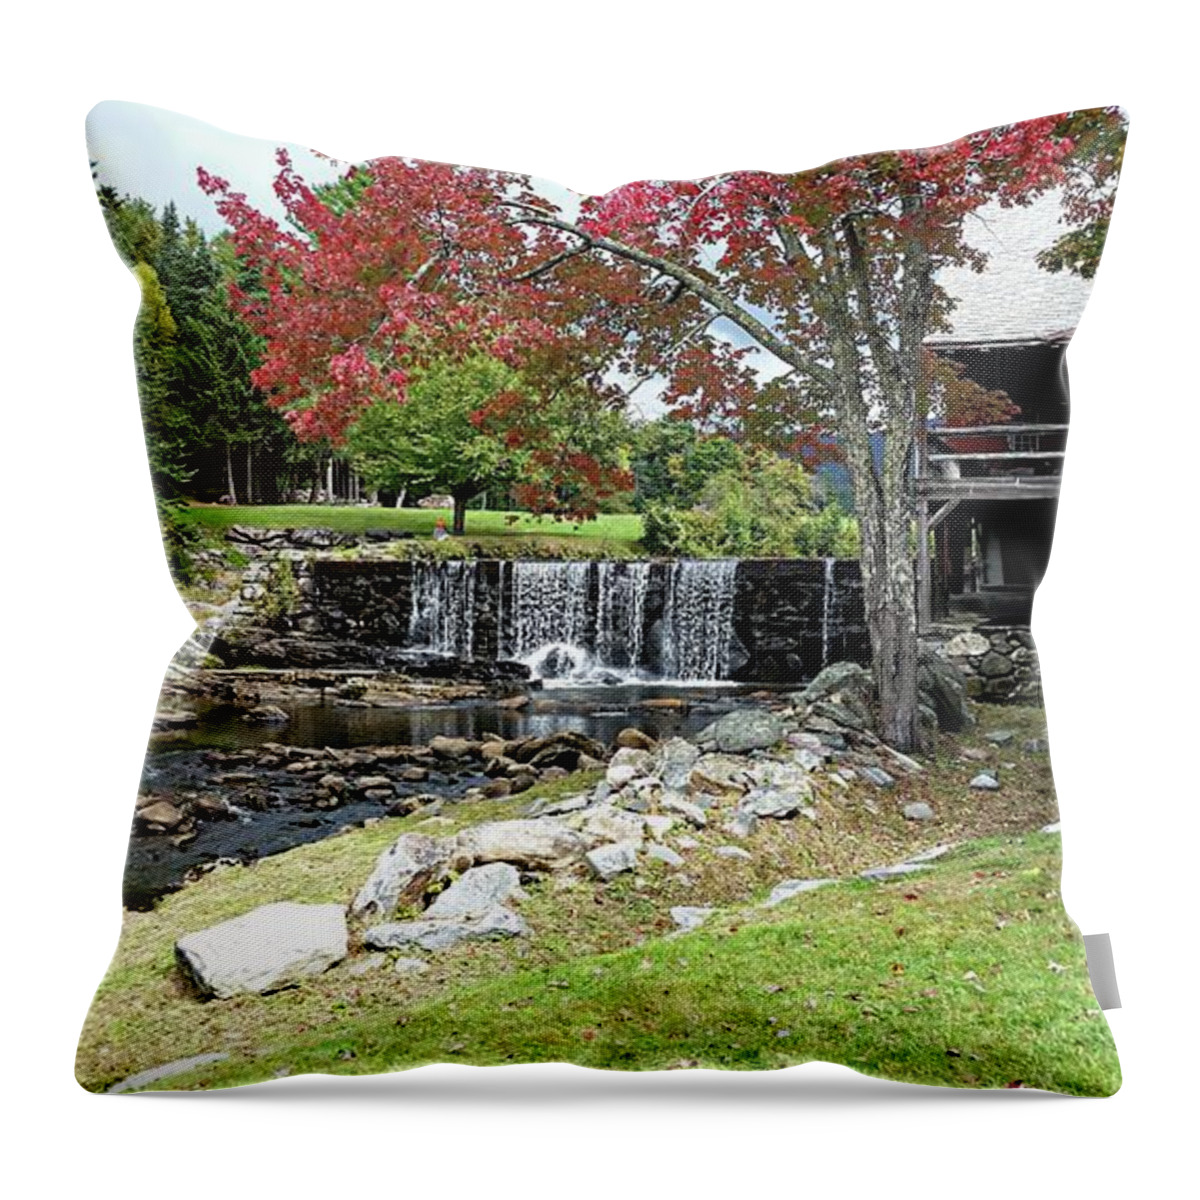 United States Throw Pillow featuring the photograph Old Mill - Weston, Vermont by Joseph Hendrix